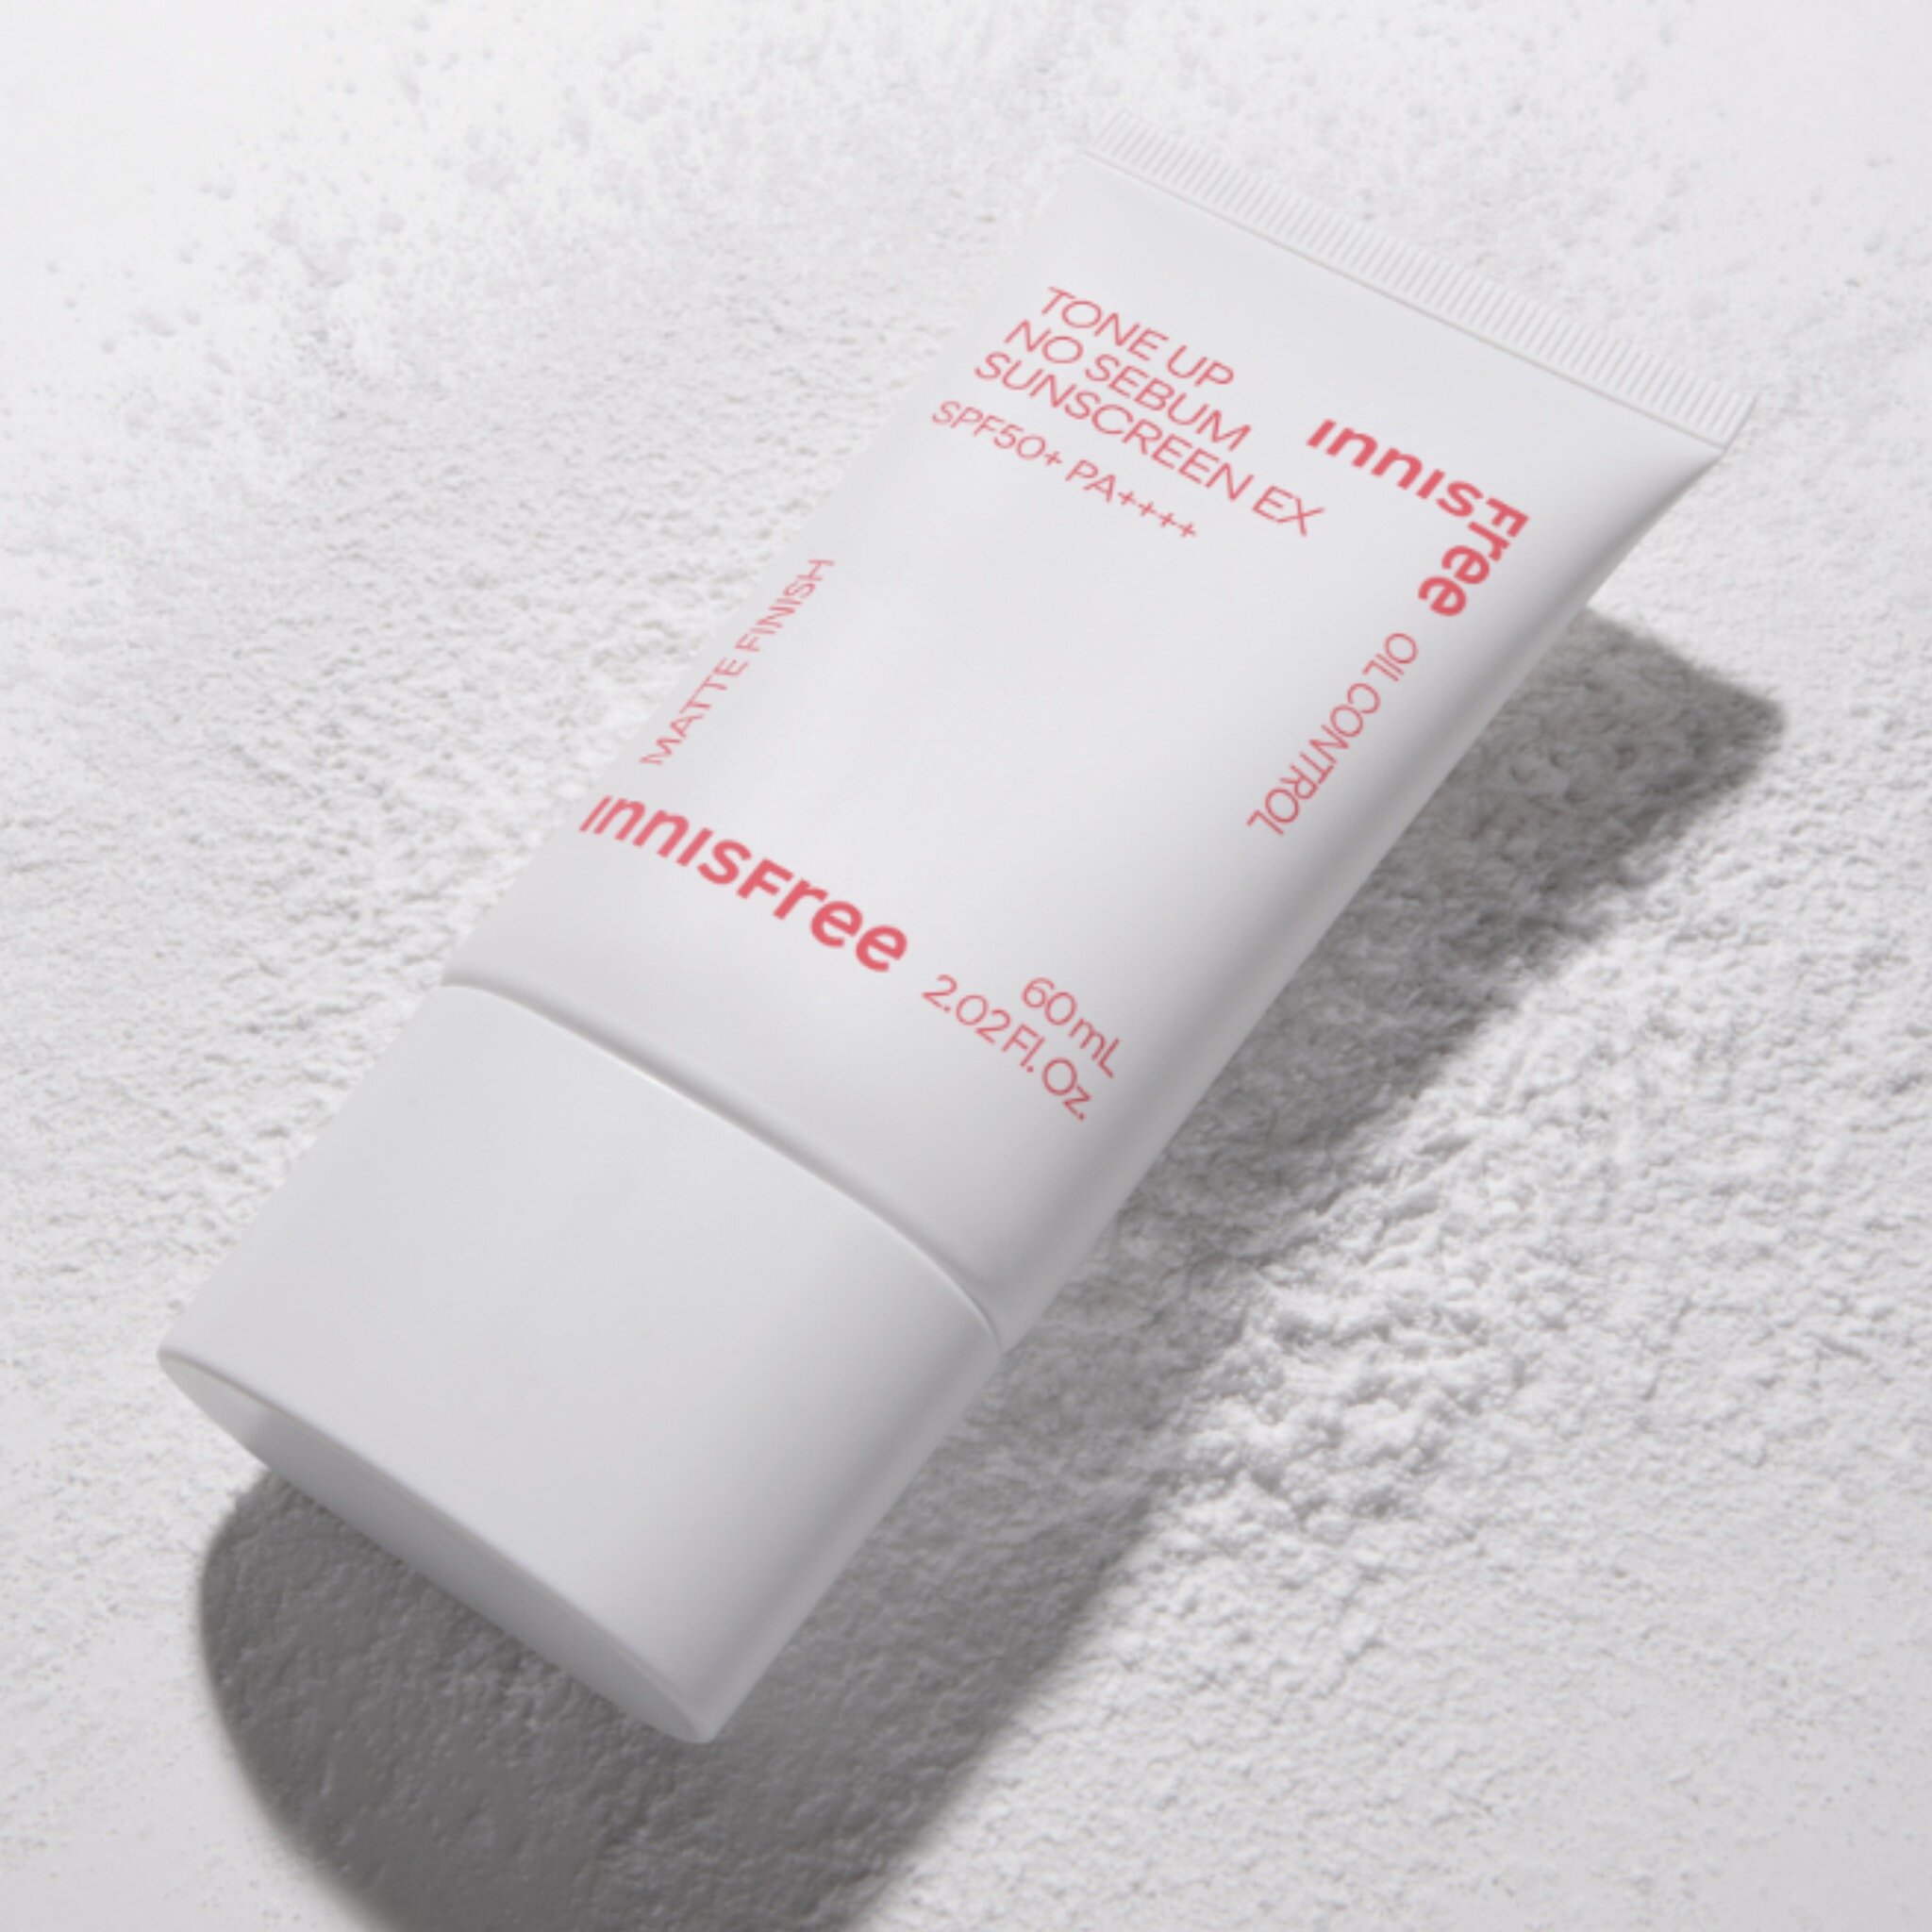 A lightweight and matte-finish sunscreen from Innisfree that will leave your skin shine-free, and looking instantly smoother and brighter. It's infused with sebum control powder that helps keep skin oil-free. It has a slight pink color that provides 